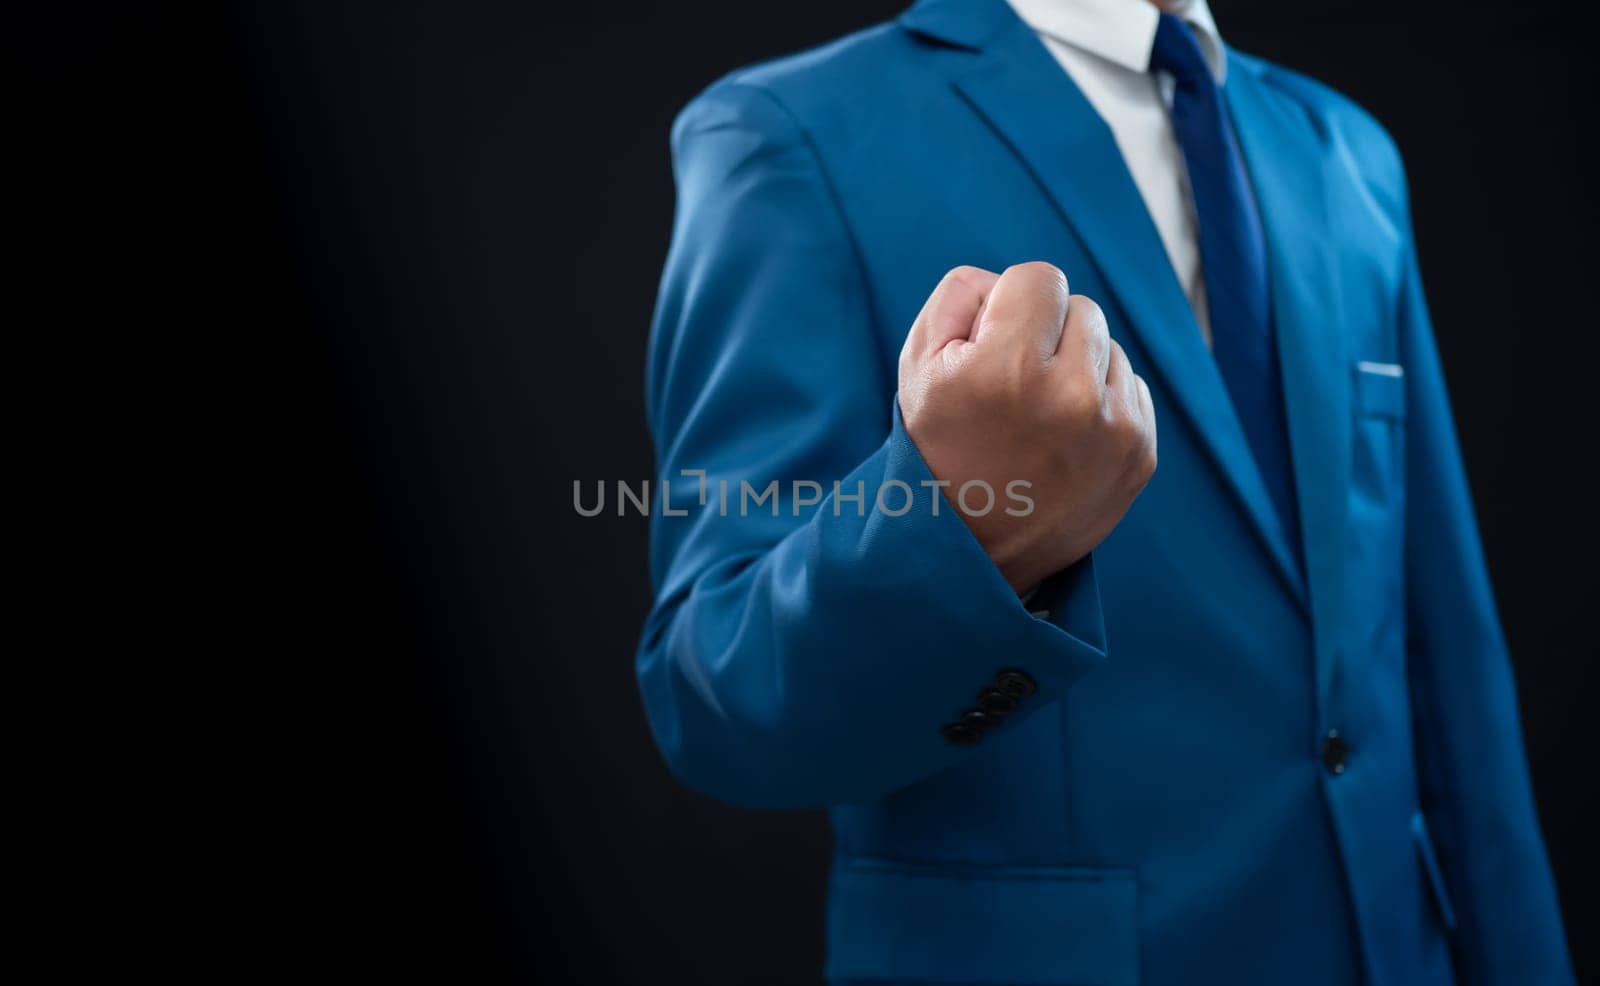 Businessman in blue suit and showing fist on a fresh background. by Unimages2527